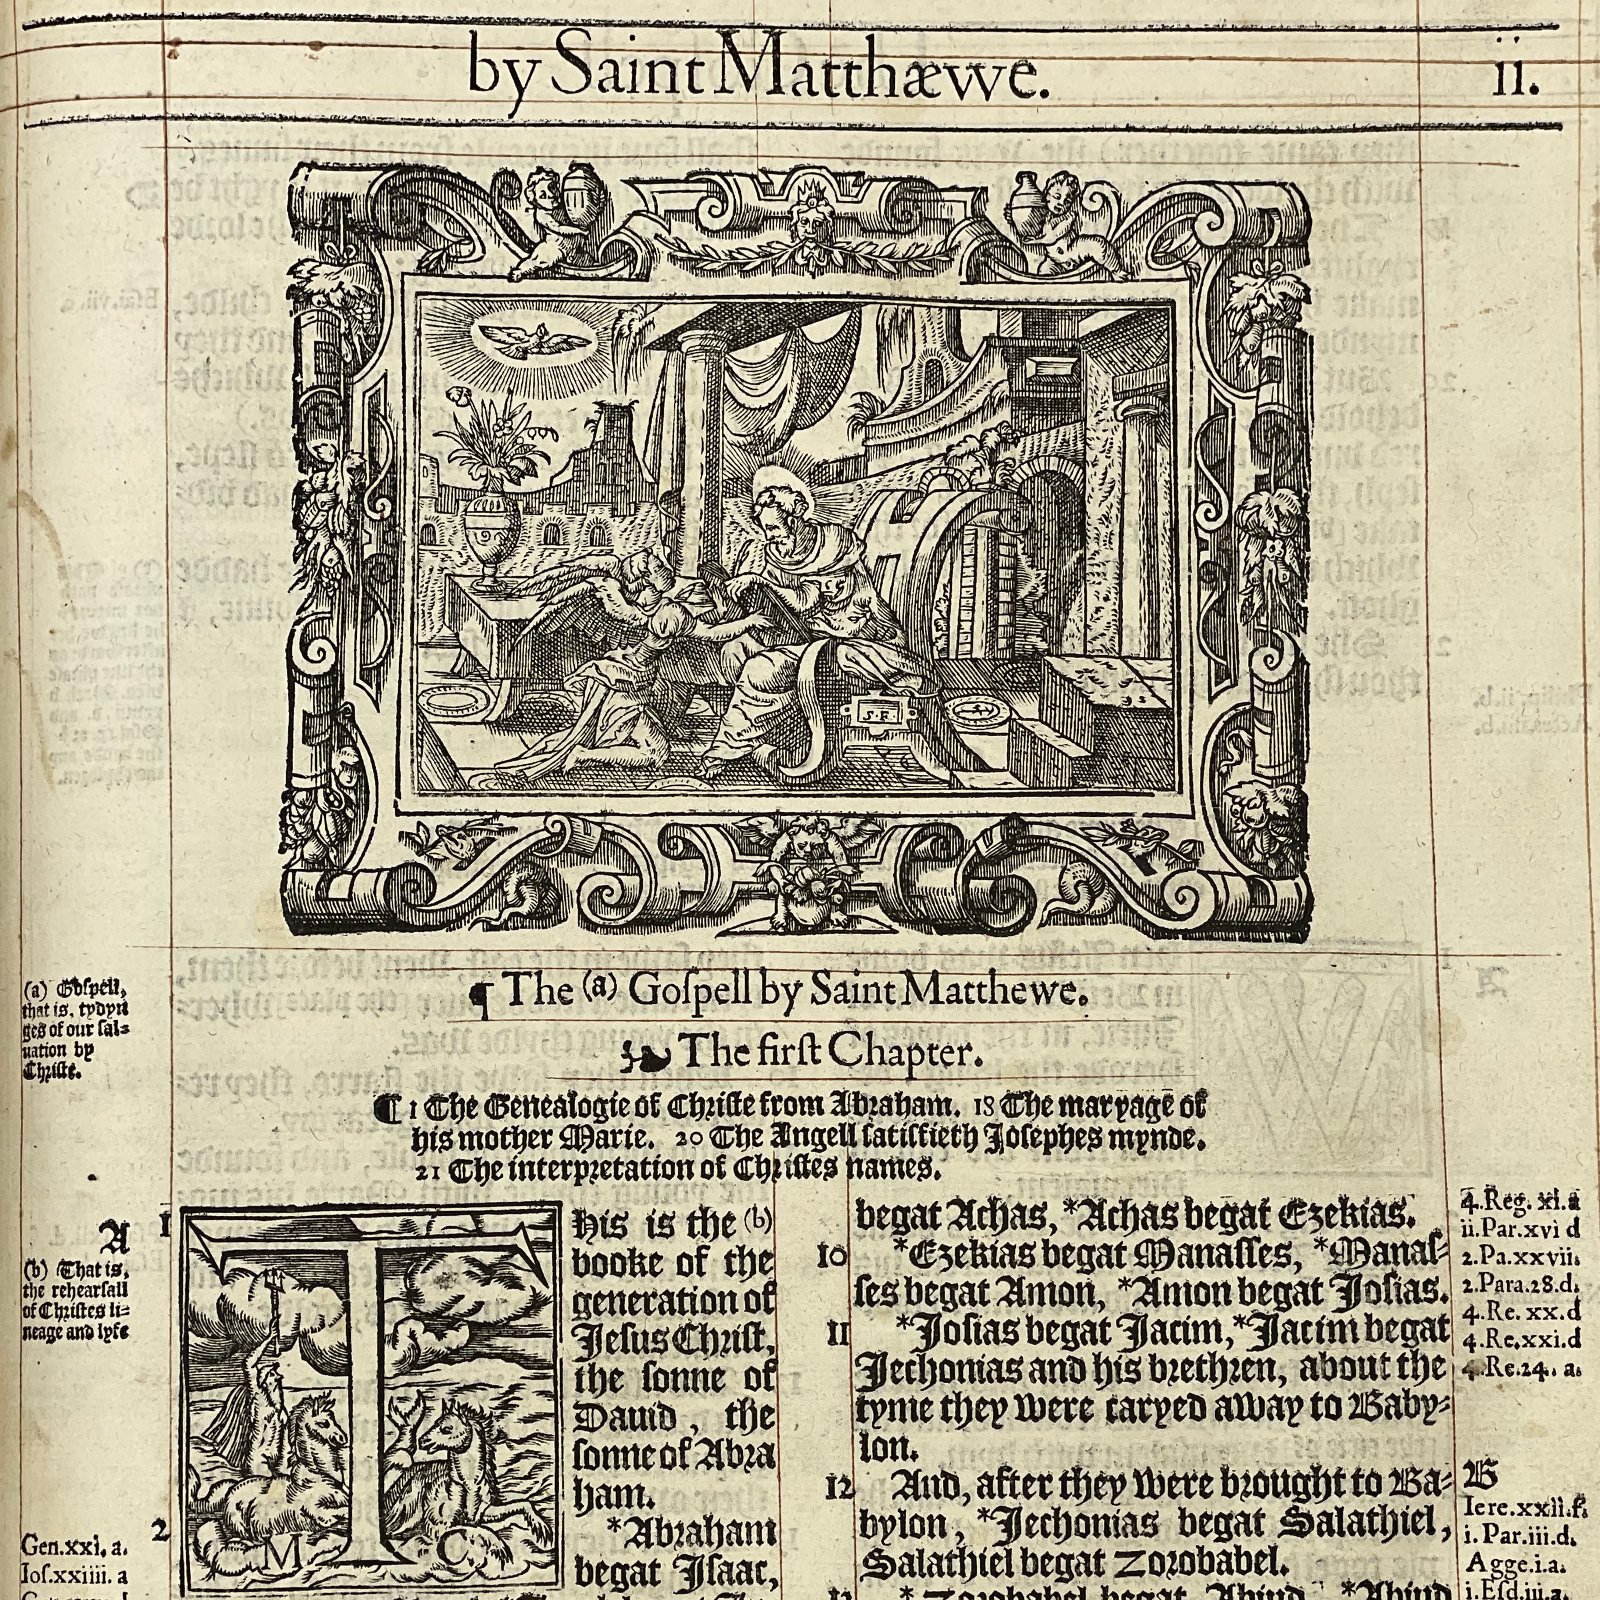  Woodcut first chapter initials and illustrations were placed within the text. 